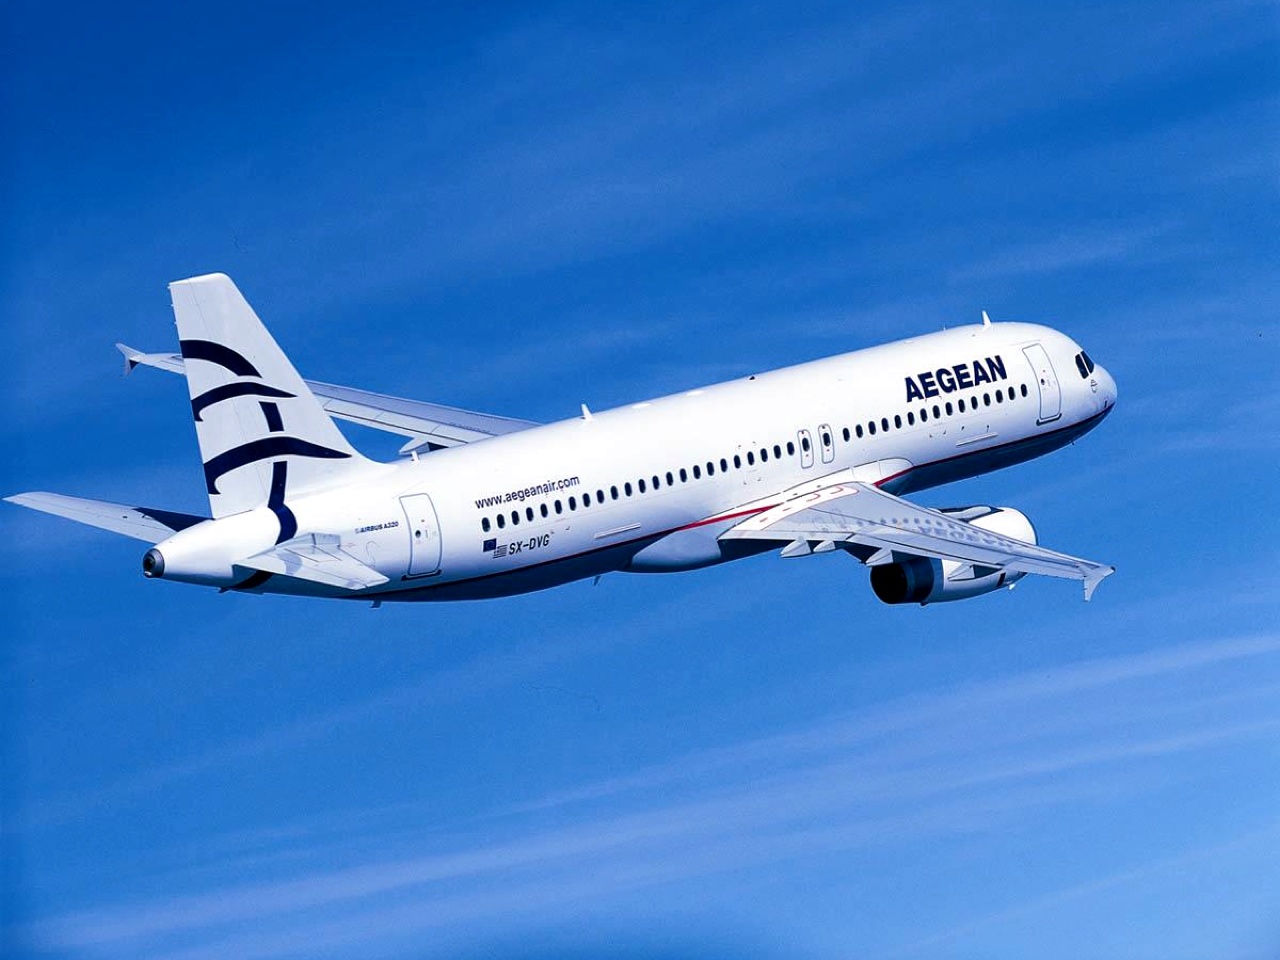 Condé Nast Traveler: AEGEAN Among World’s Top 10 Airlines